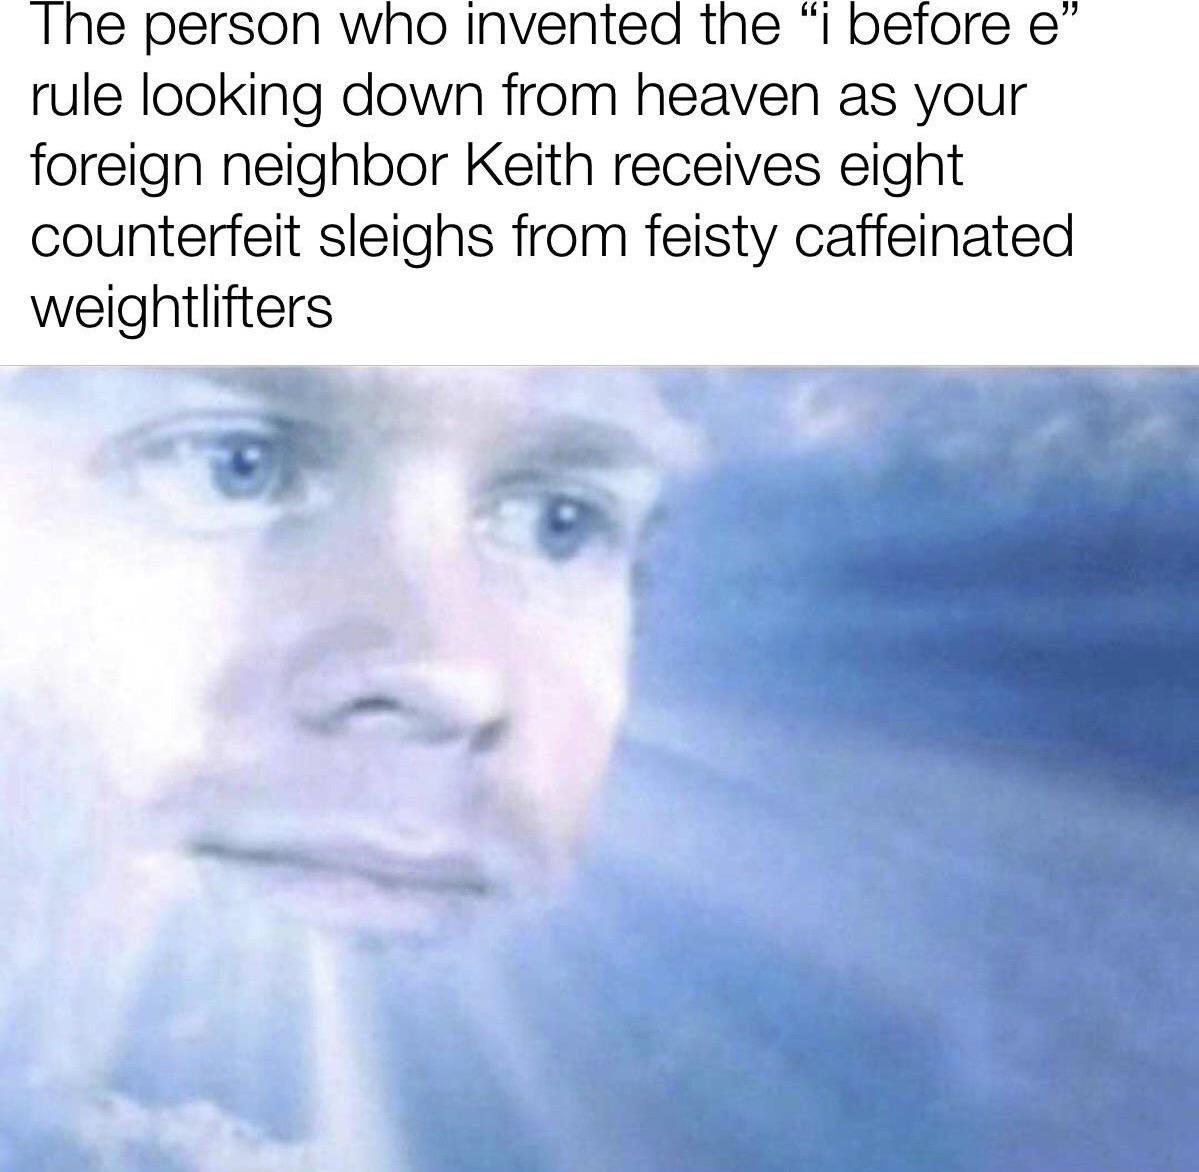 funny memes and pics - karen mask meme - The person who invented the "i before e rule looking down from heaven as your foreign neighbor Keith receives eight counterfeit sleighs from feisty caffeinated weightlifters